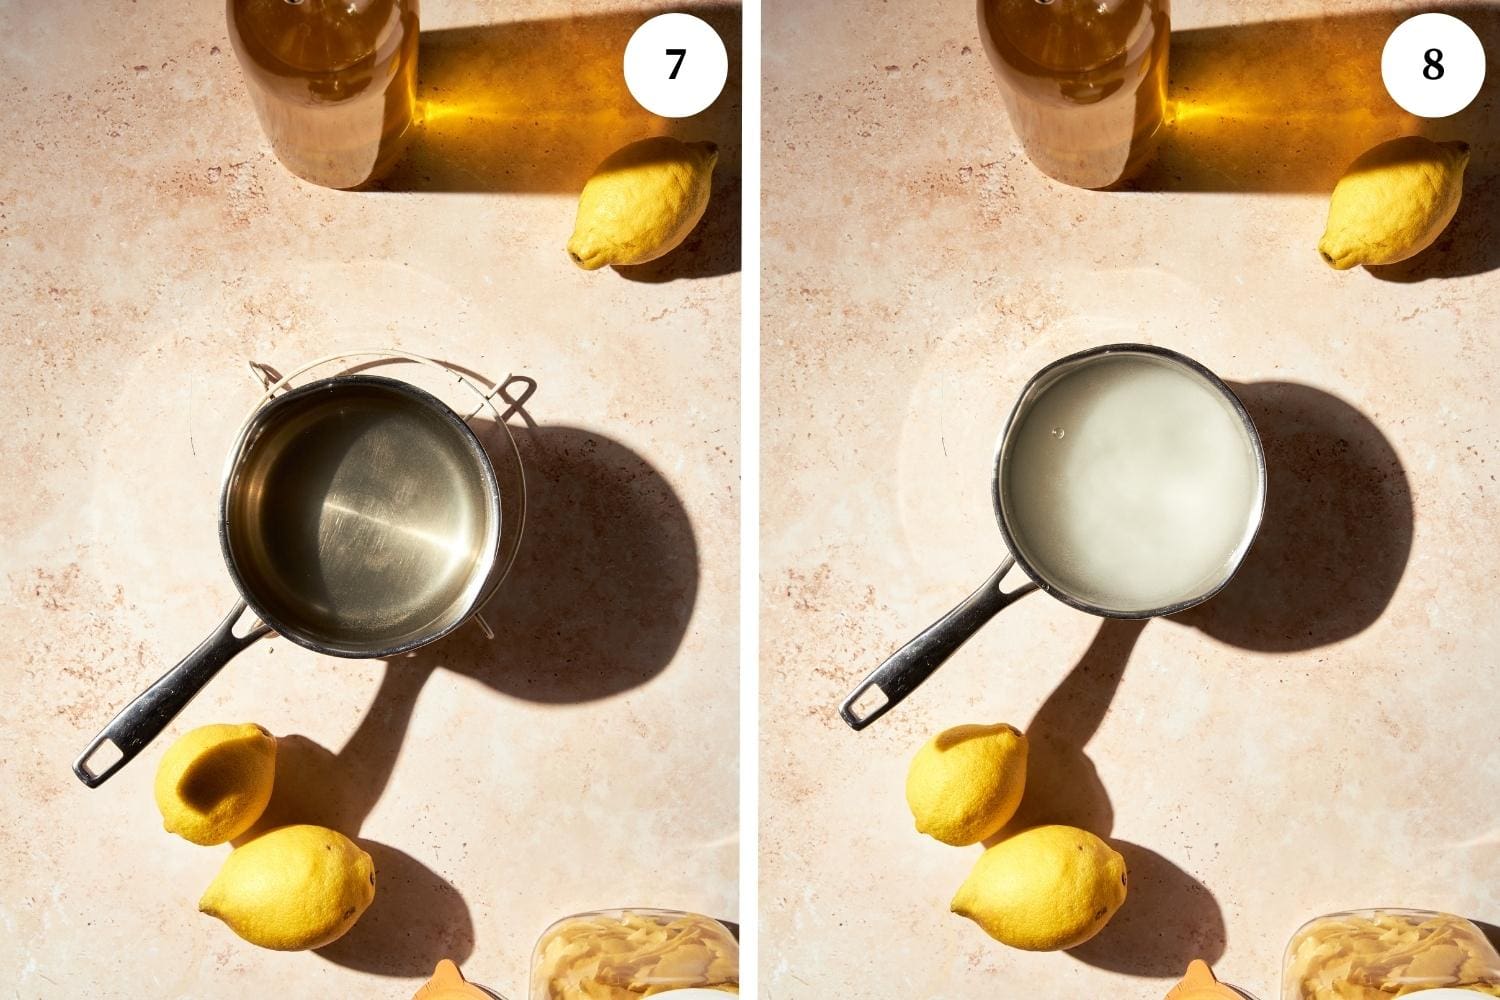 Homemade limoncello procedure:  the sugar is dissolved in heated water.